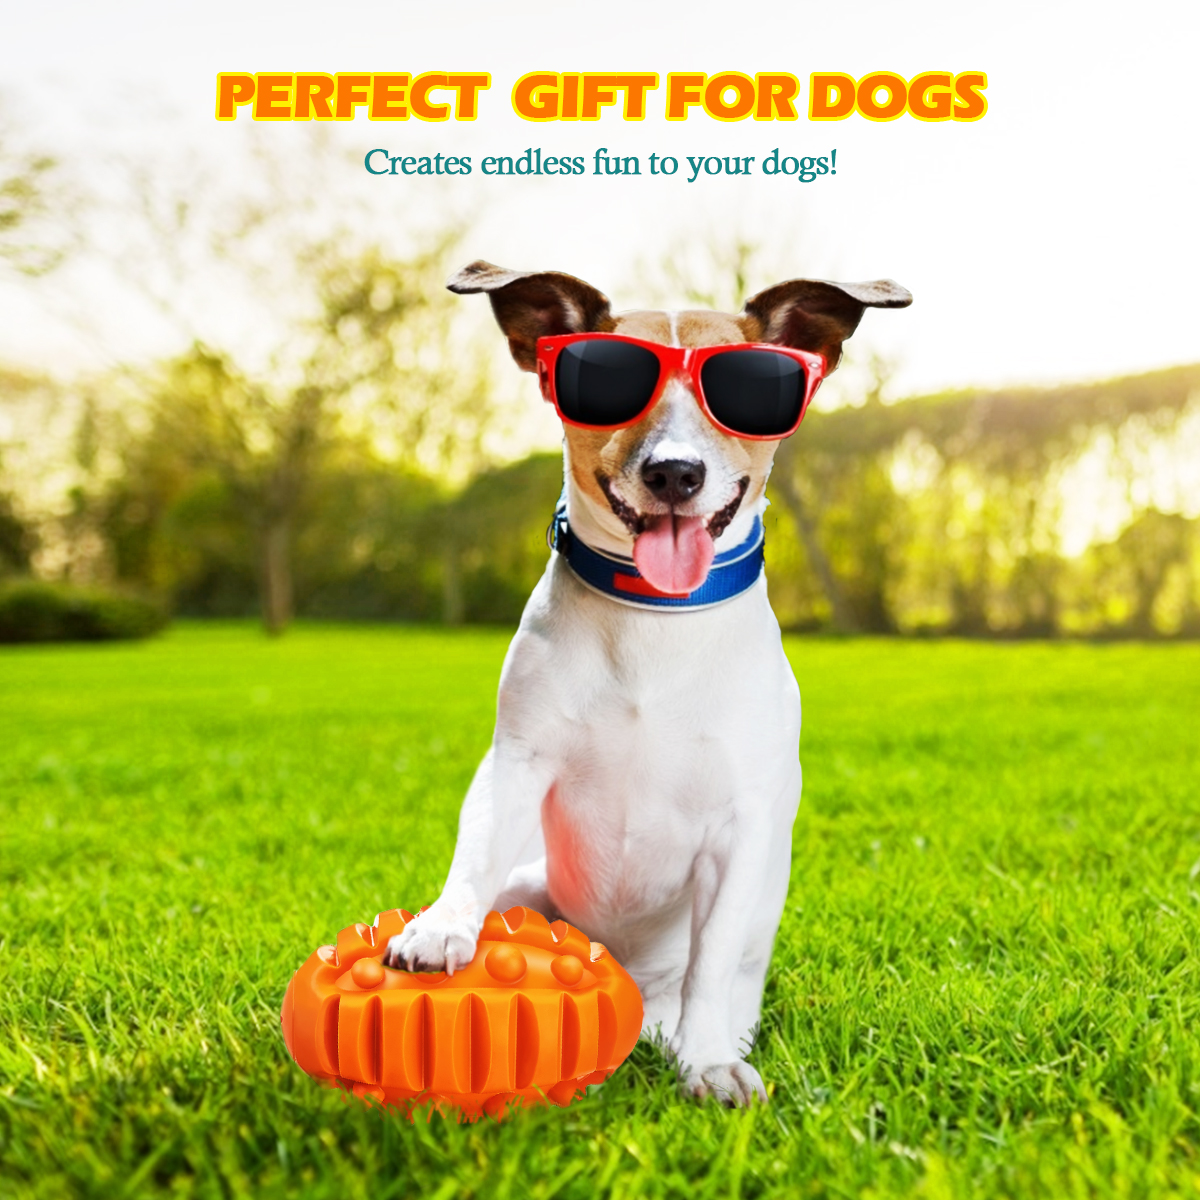 Focuspet-5quotx-3quot-Large-Interactive-Dog-Ball-Toys-Real-Beef-Flavor-Squeaky-Chew-Toy-for-Medium-L-1940481-7